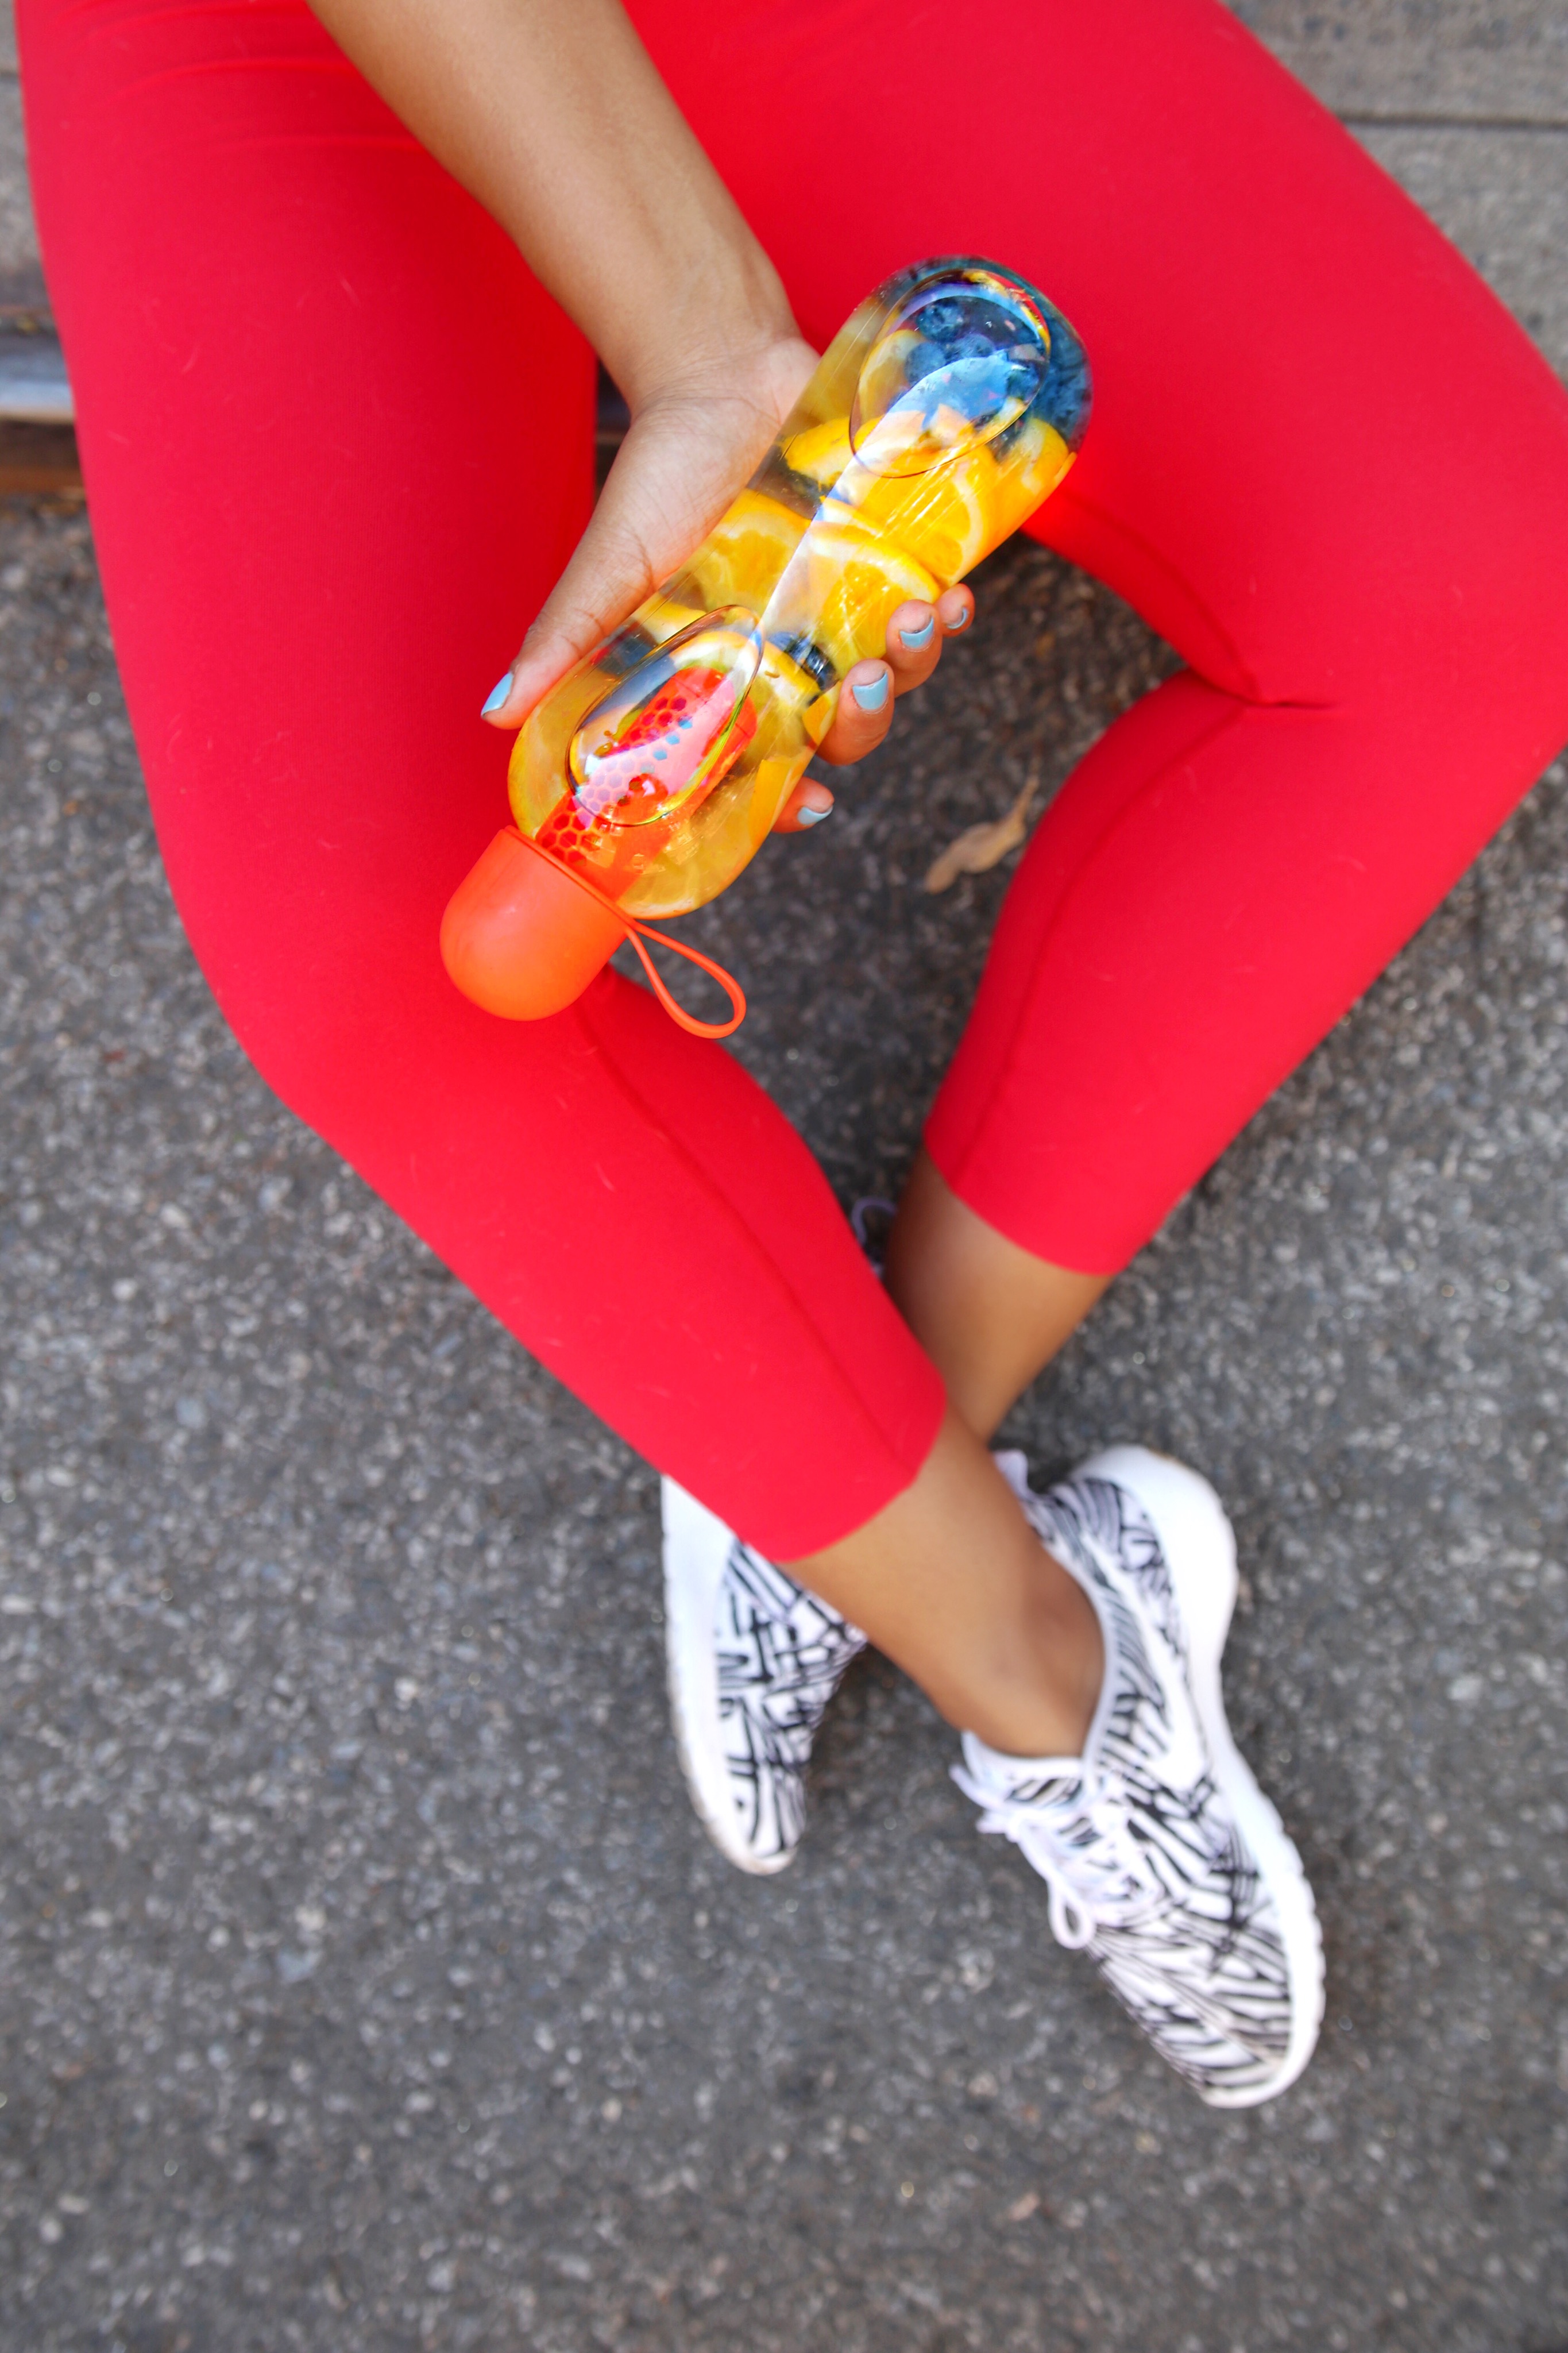 Work Out Style! pants: http://bit.ly/28YAqpD sports bra: http://bit.ly/292Ht25 bottle: http://bit.ly/295A2rz nikes: http://bit.ly/295AnMw